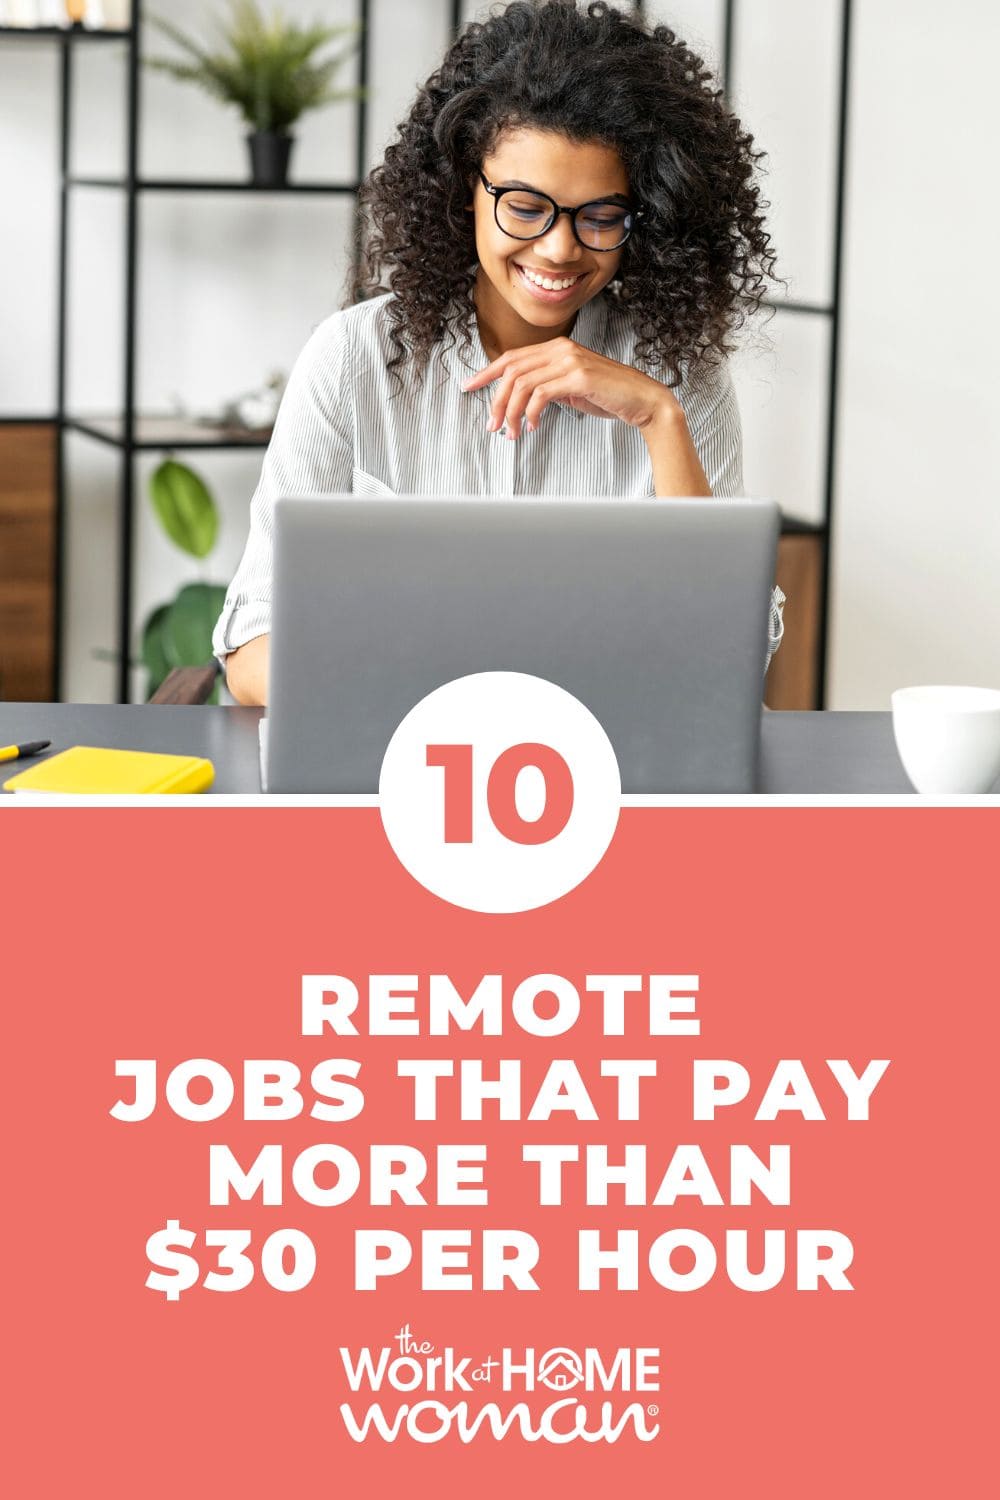 If you need a good-paying work from home job, look no further! Here are 10 remote jobs that pay $30 per hour or more!